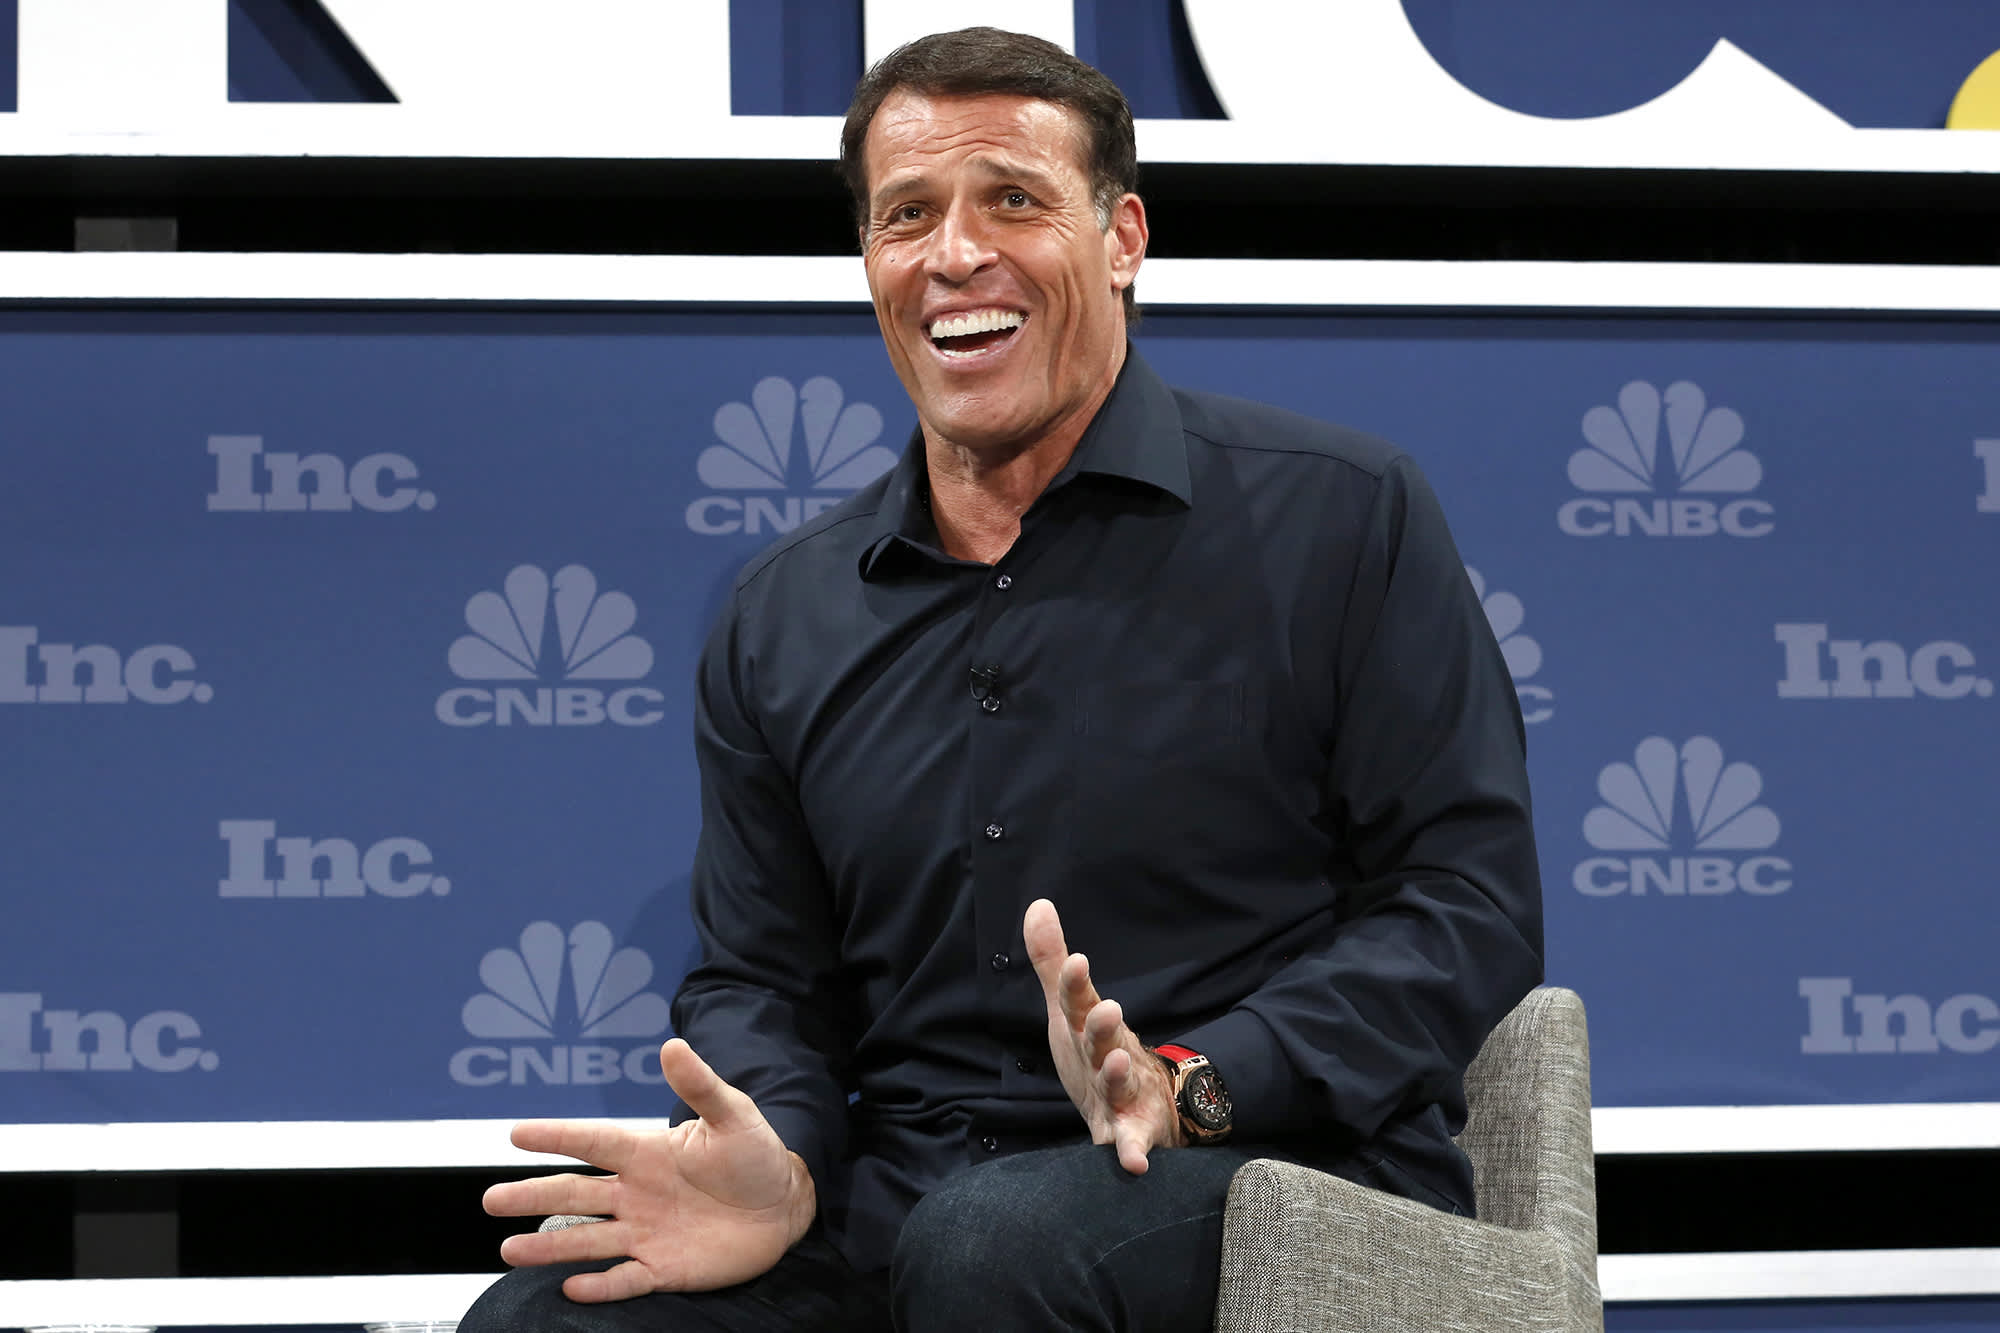 Tony robbins height and weight